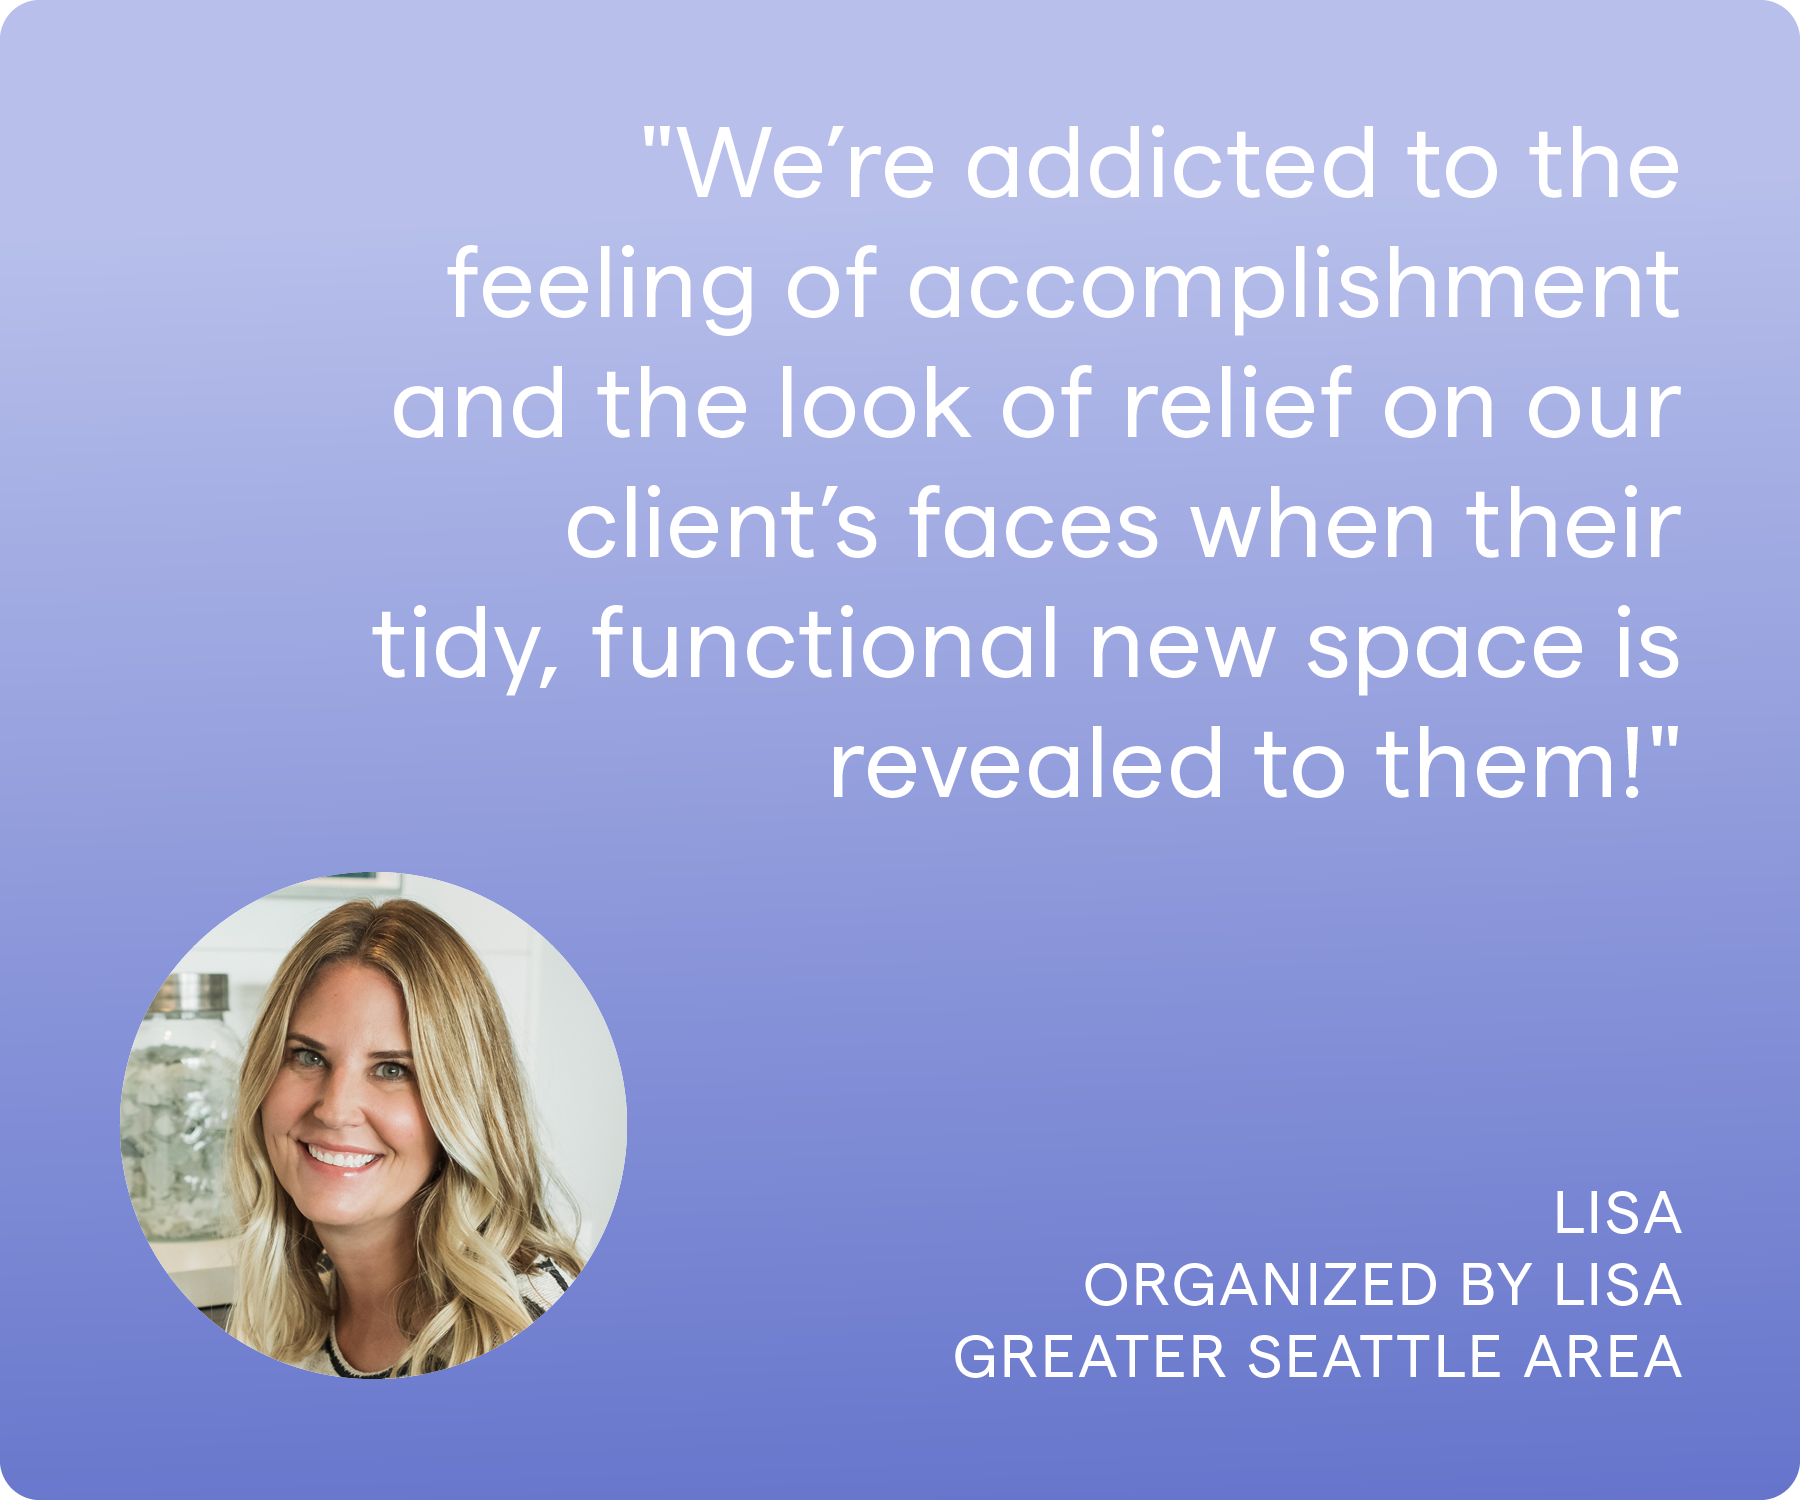 'We’re addicted to the feeling of accomplishment and the look of relief on our client’s faces when their tidy, functional new space is revealed to them.' Lisa, Organized by Lisa, Greater Seattle/Bellevue